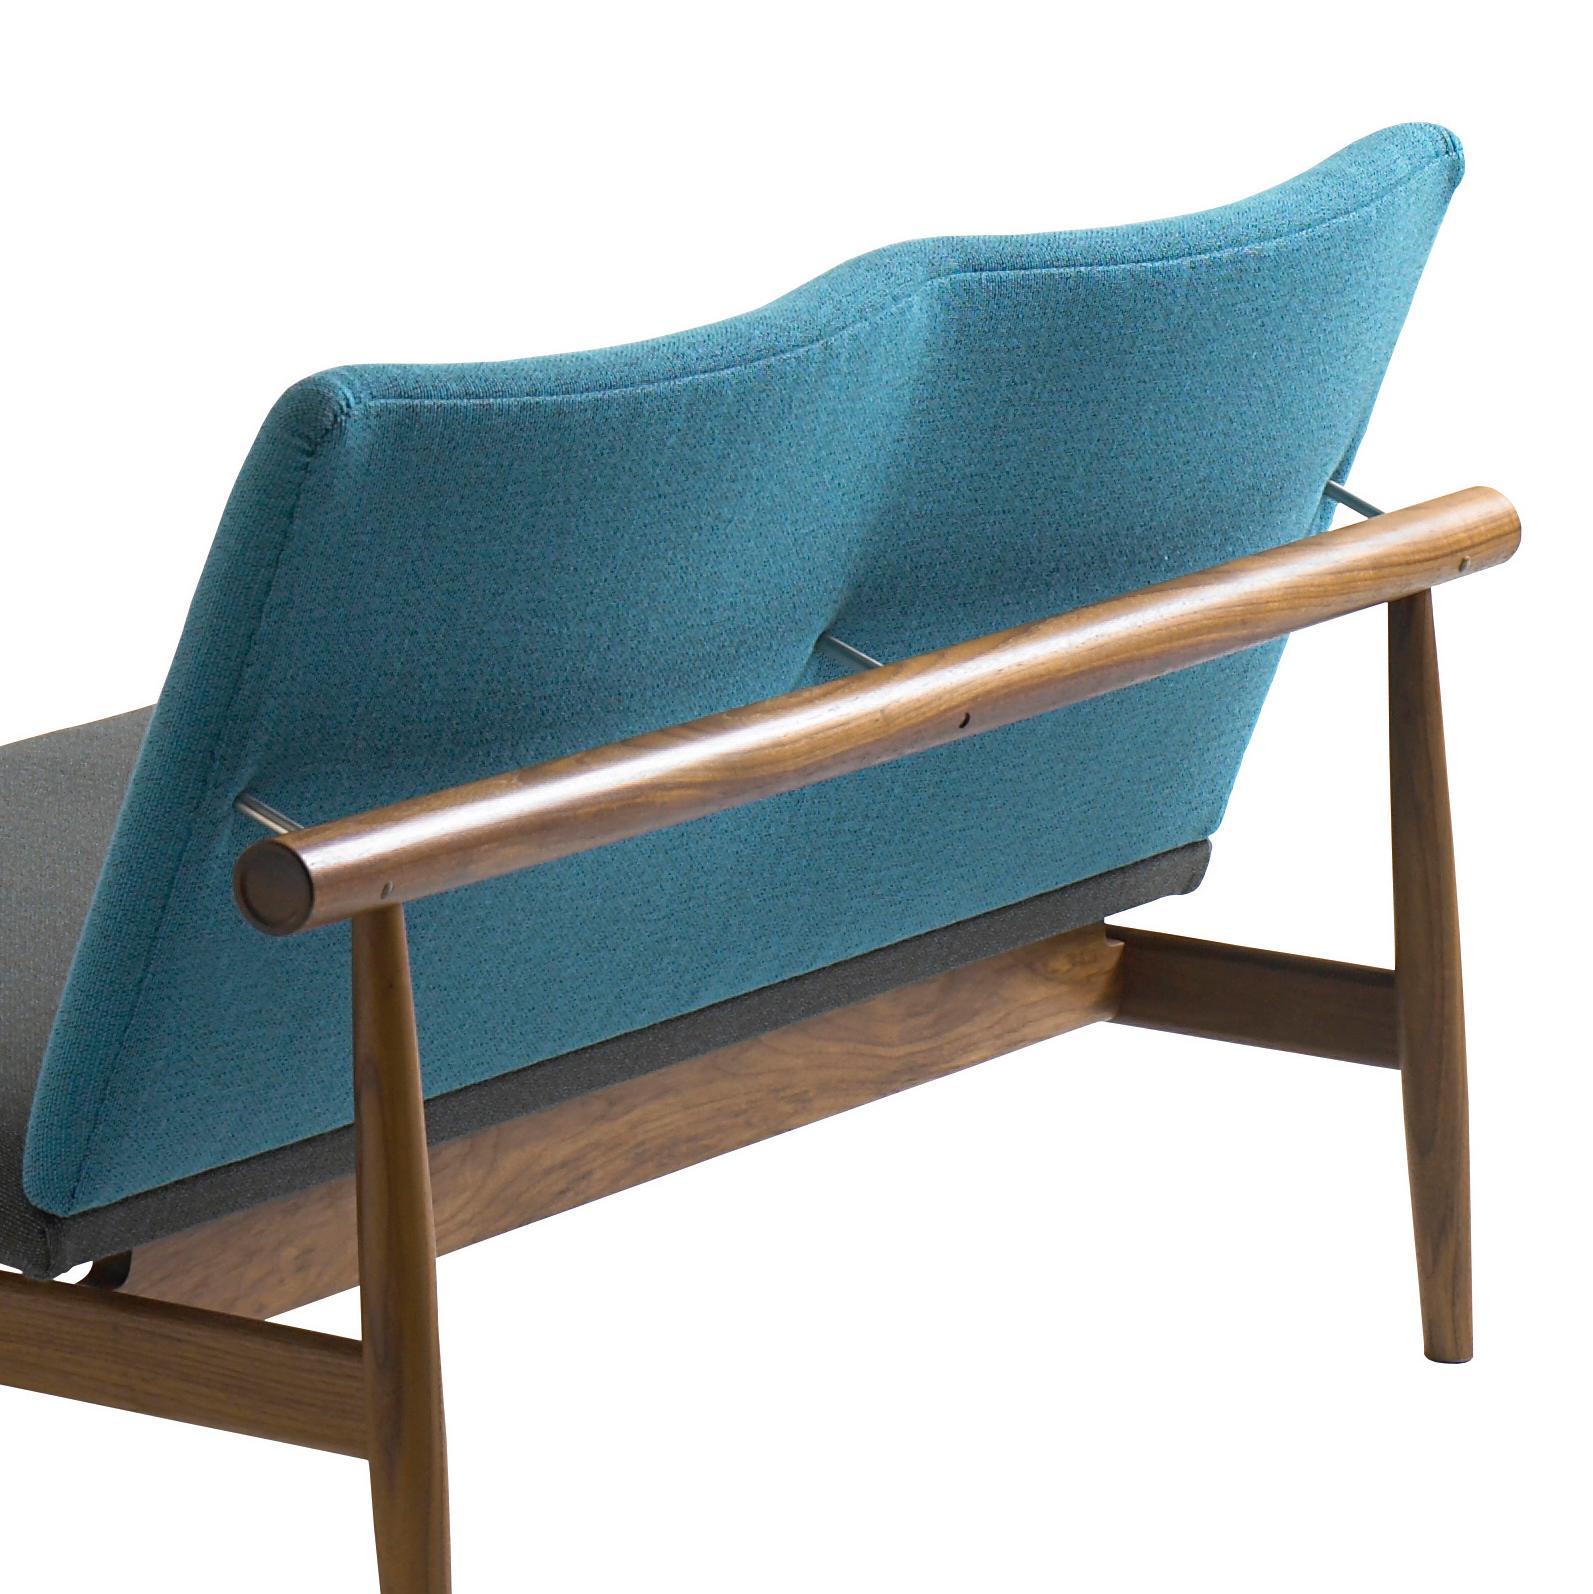 Two-Seaters Sofa designed by Finn Juhl in 1957, relaunched in 2007.
Manufactured by House of Finn Juhl in Denmark.

Finn Juhl’s partnership with the furniture manufacturer France & Son gave birth to a series of furniture well-suited for industrial